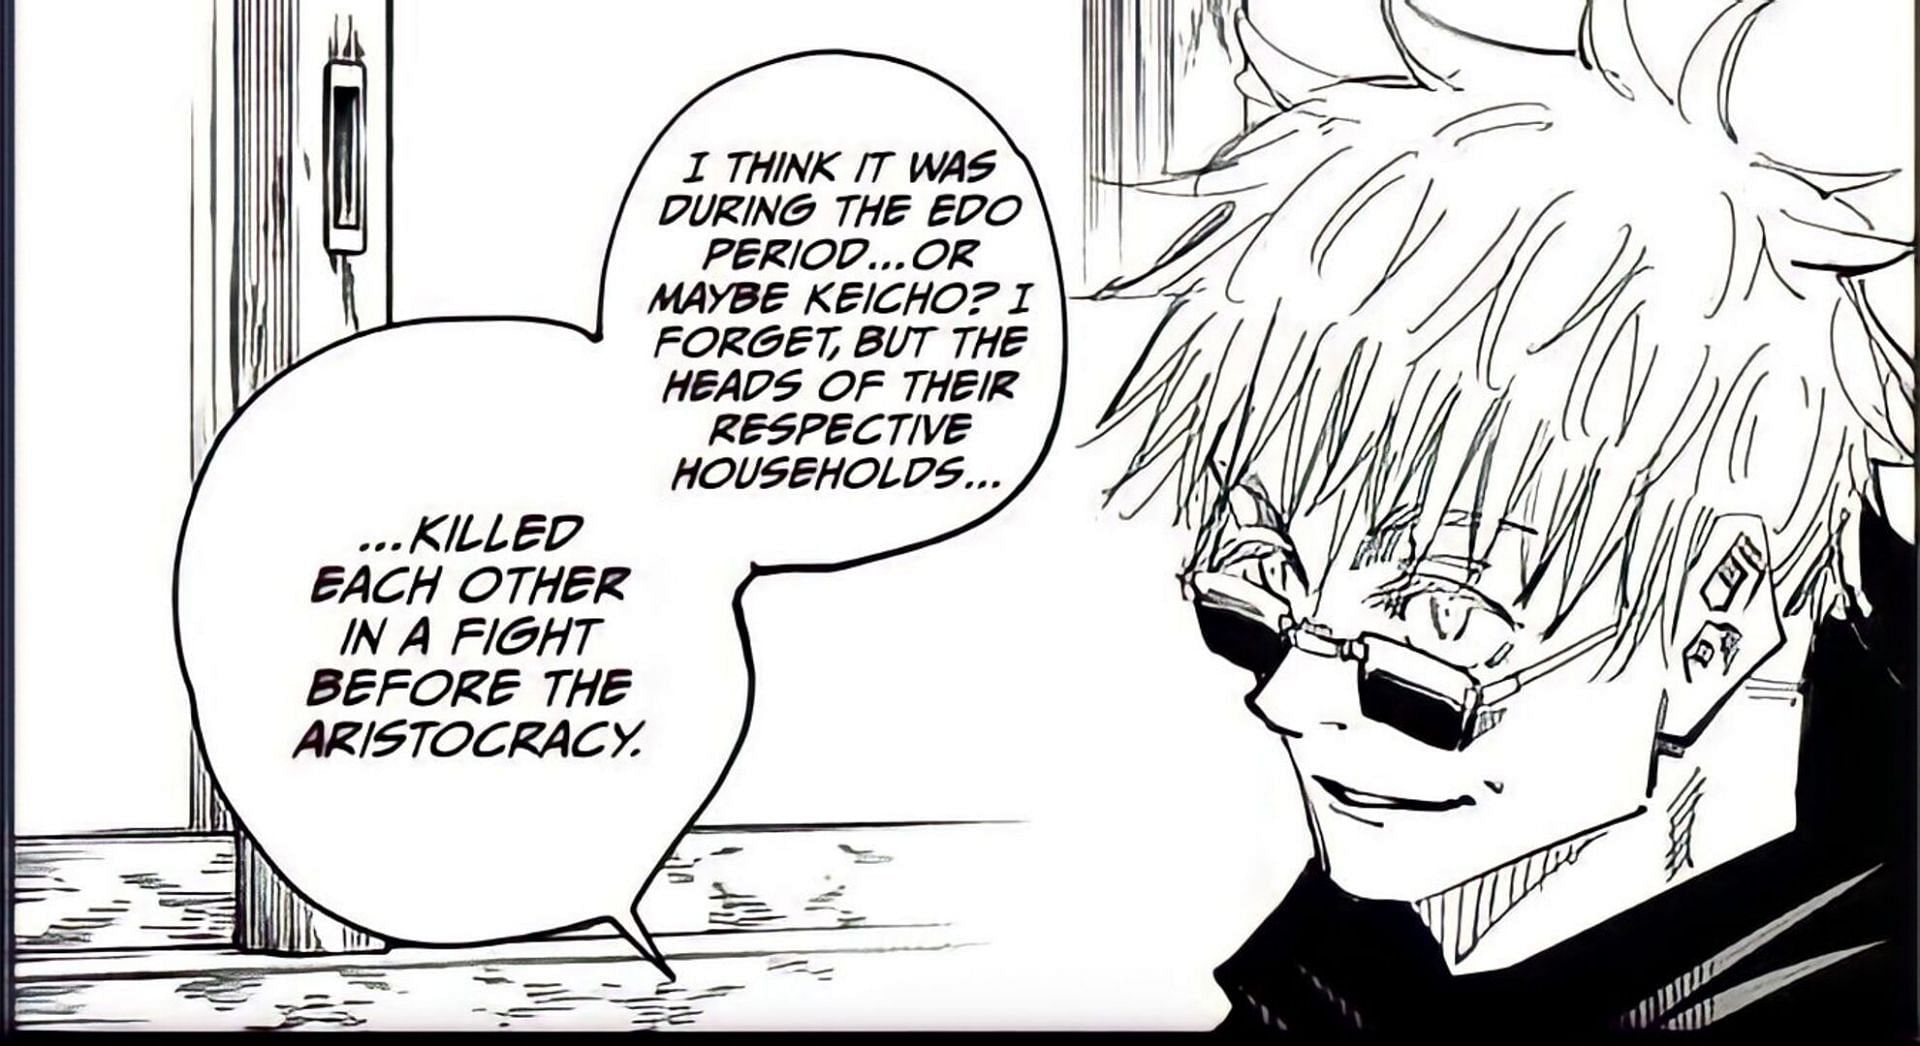 Jujutsu Kaisen chapter 212 sets up Gojo vs Megumi in a way everyone feared